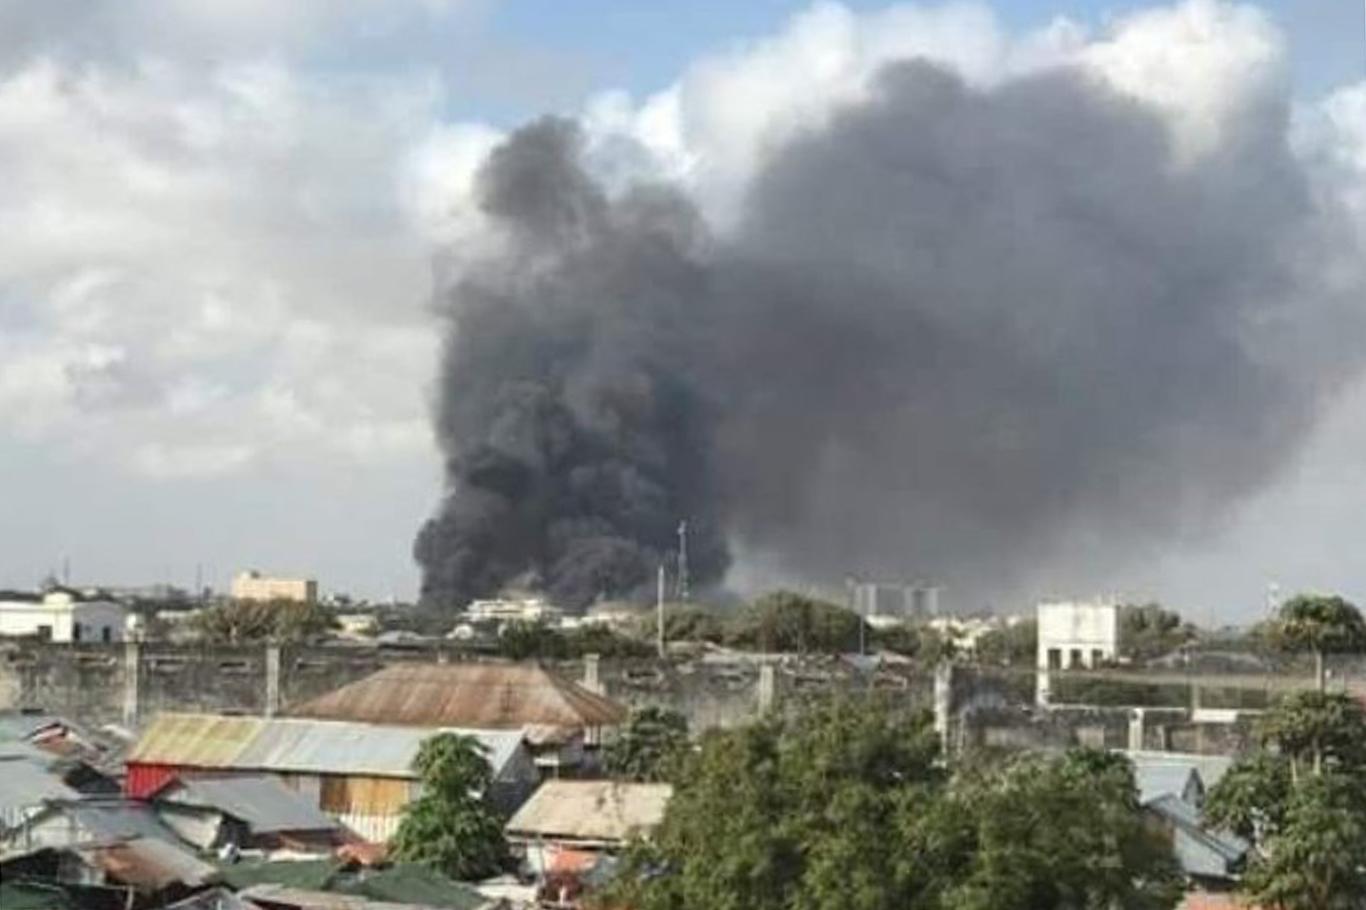 8 soldiers killed and 14 others injured in a car bomb attack in Somalia